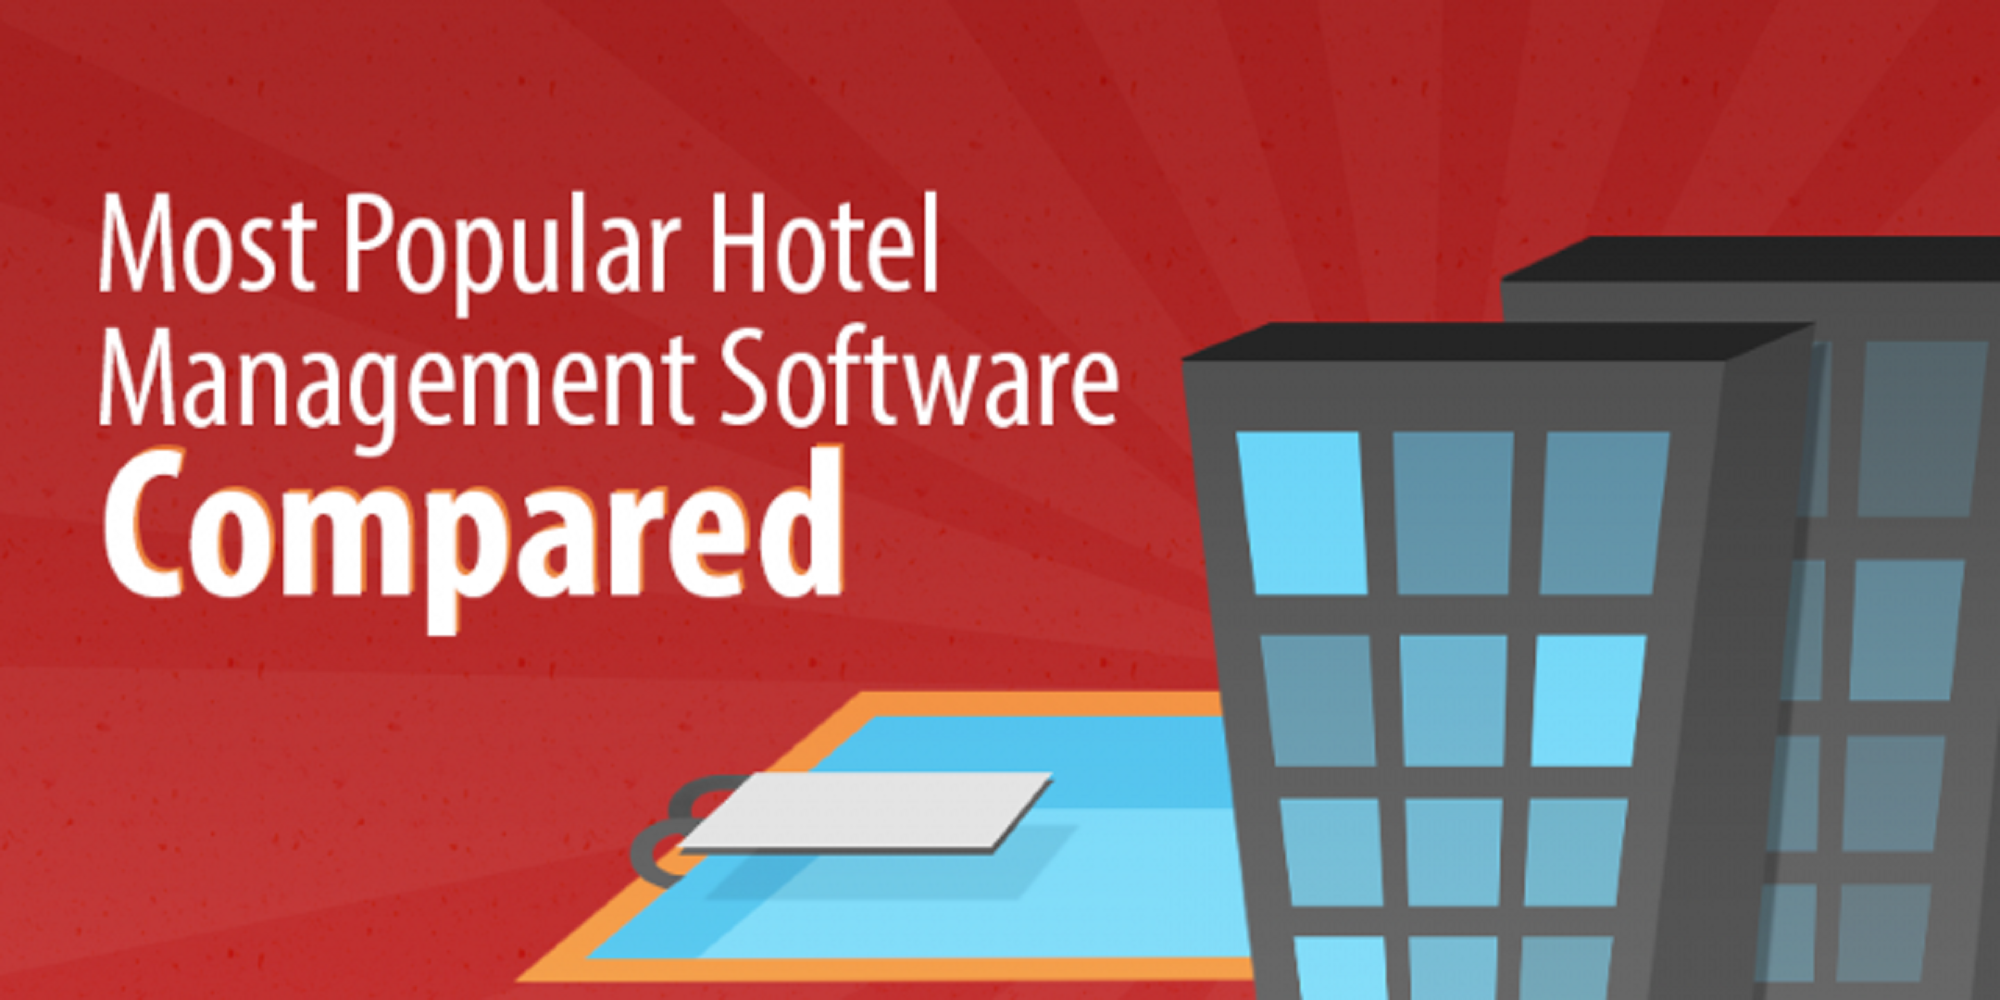 Hotel Management Software Solutions for Small Hotels